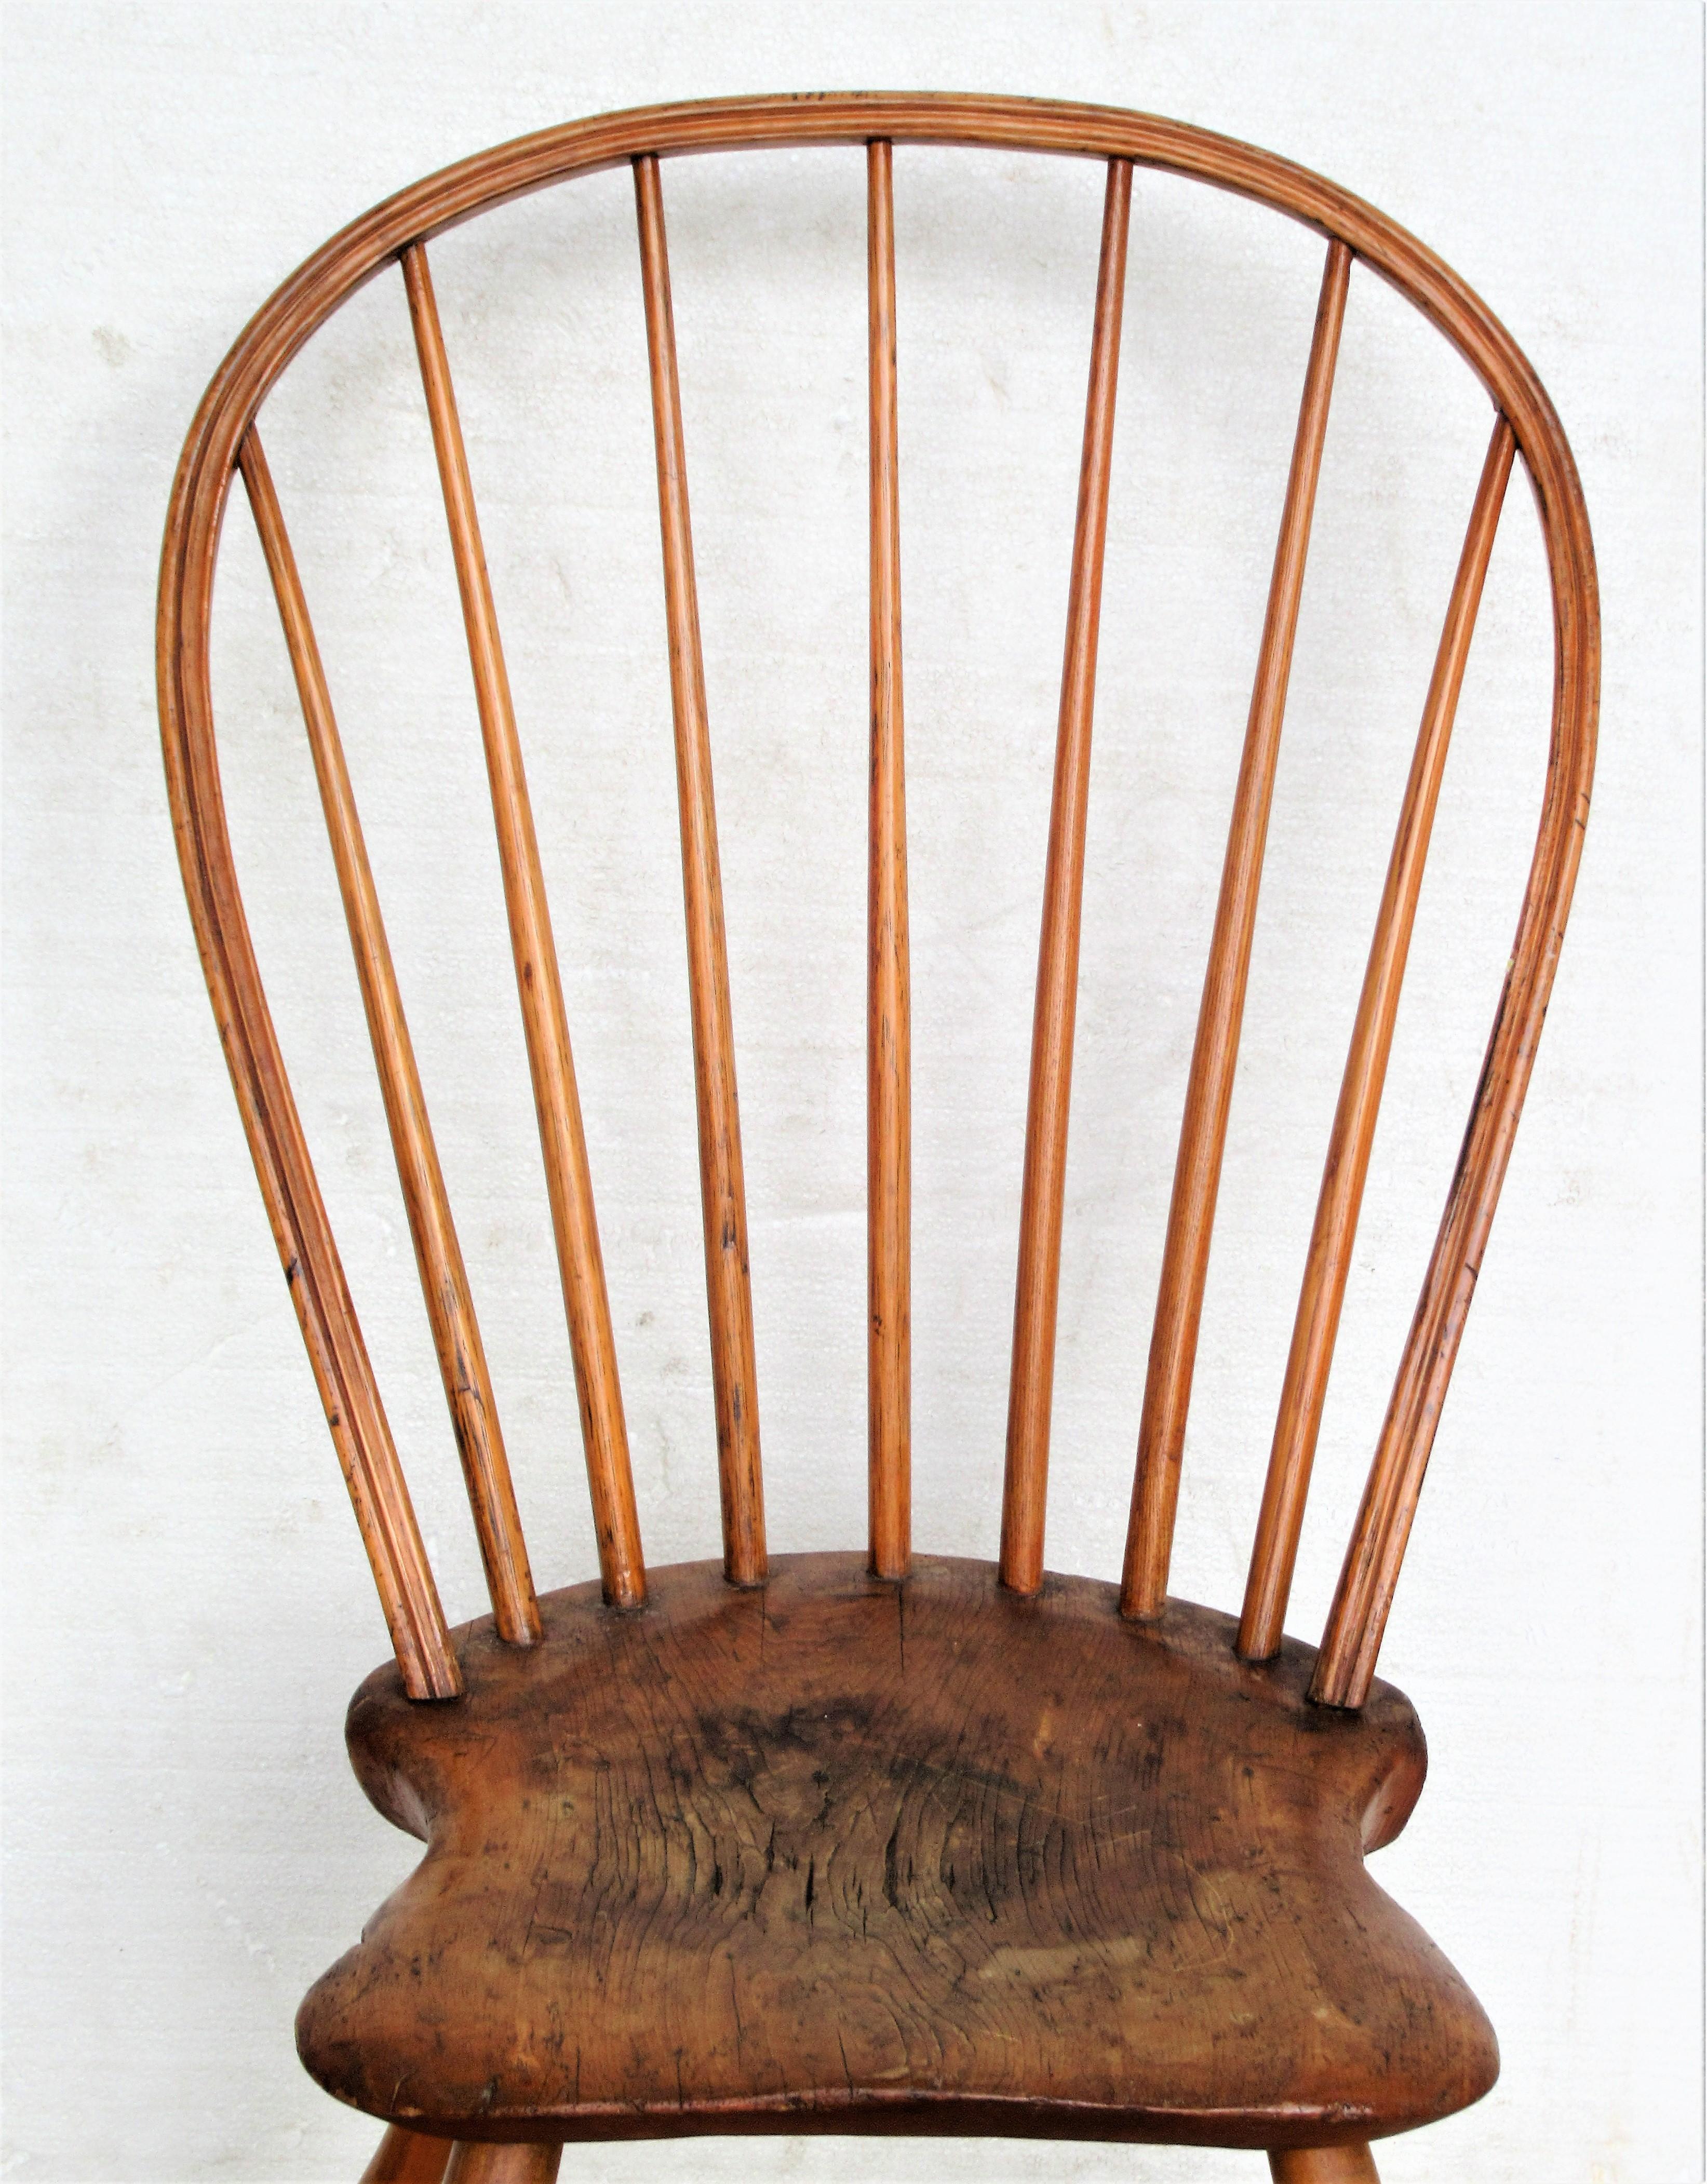 18th century bow back Windsor chair with bamboo turnings and a continuous bow like steam bent back crest that is mortised into the back of the saddle seat. Overall beautifully aged original honey color to wood with areas of darkening wear to seat